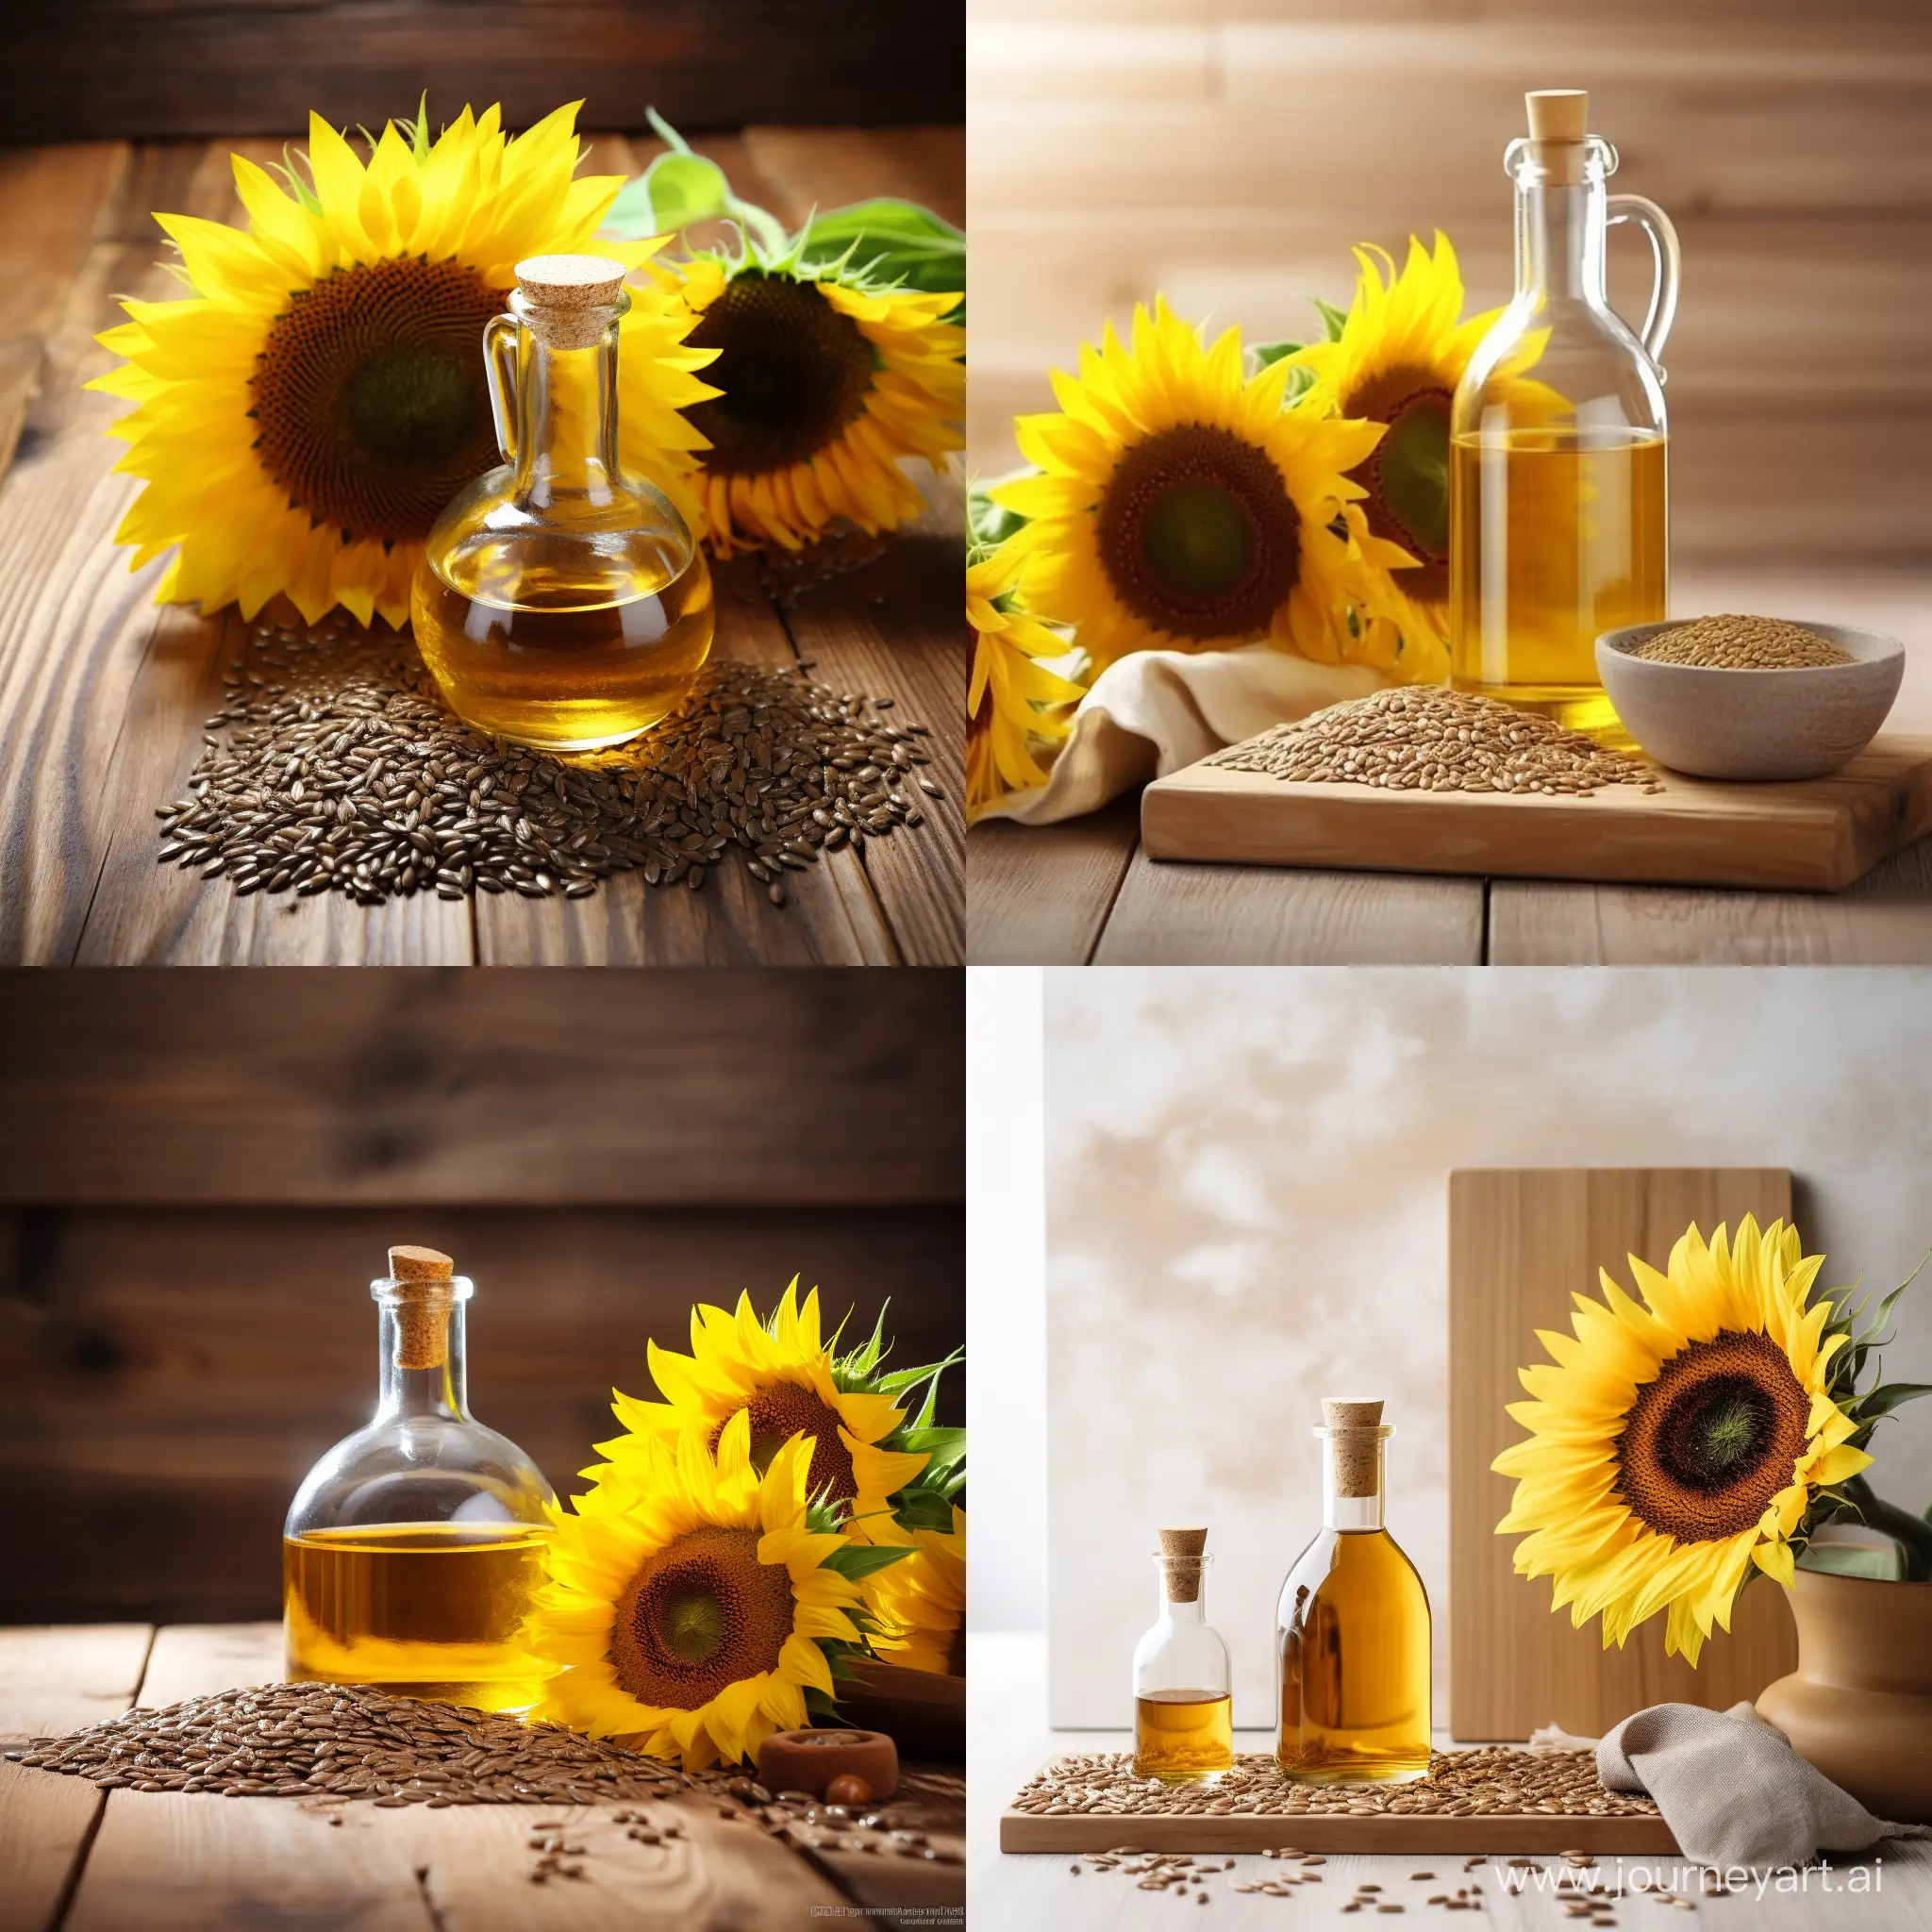 Organic-Oil-Seeds-on-Rustic-Wooden-Table-with-Golden-Morning-Light